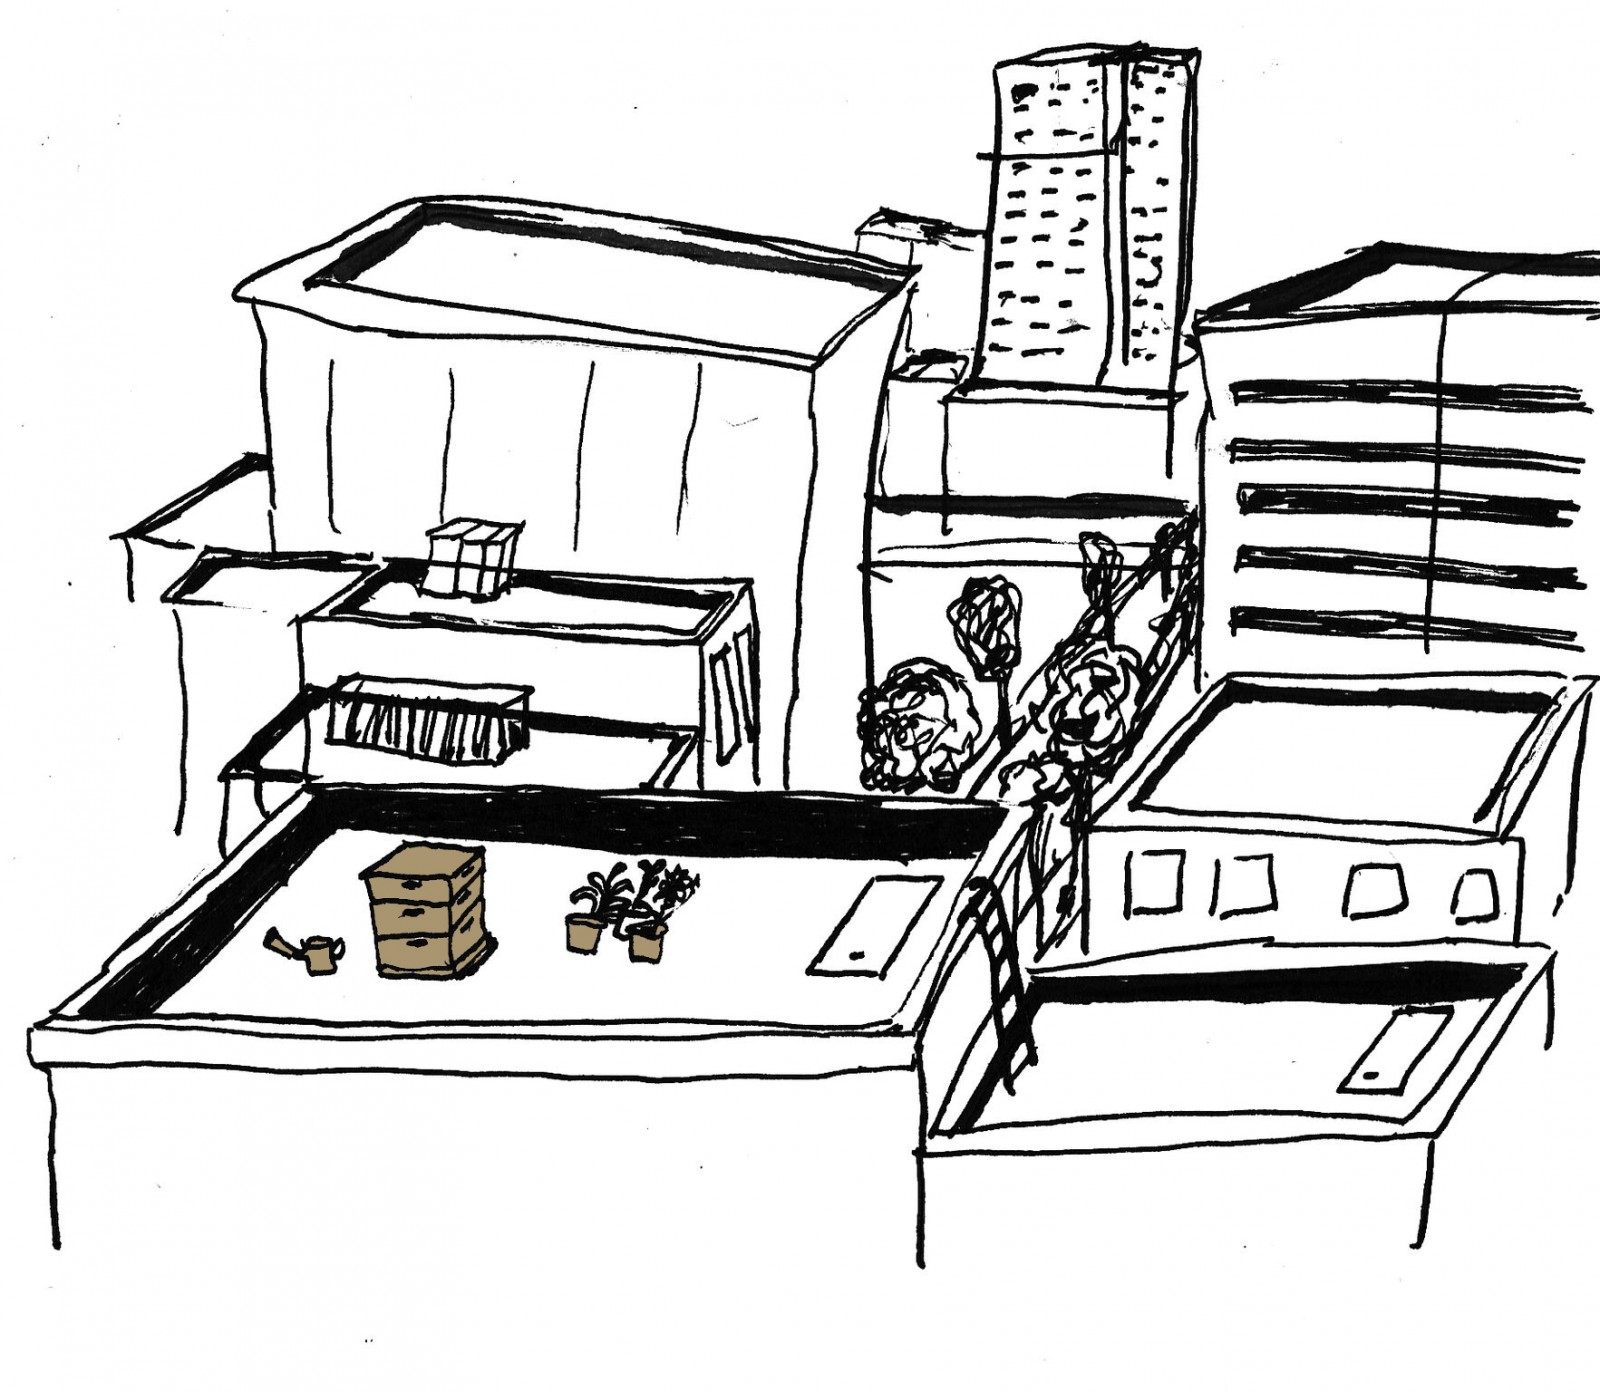 Illustration of city rooftops with beehives